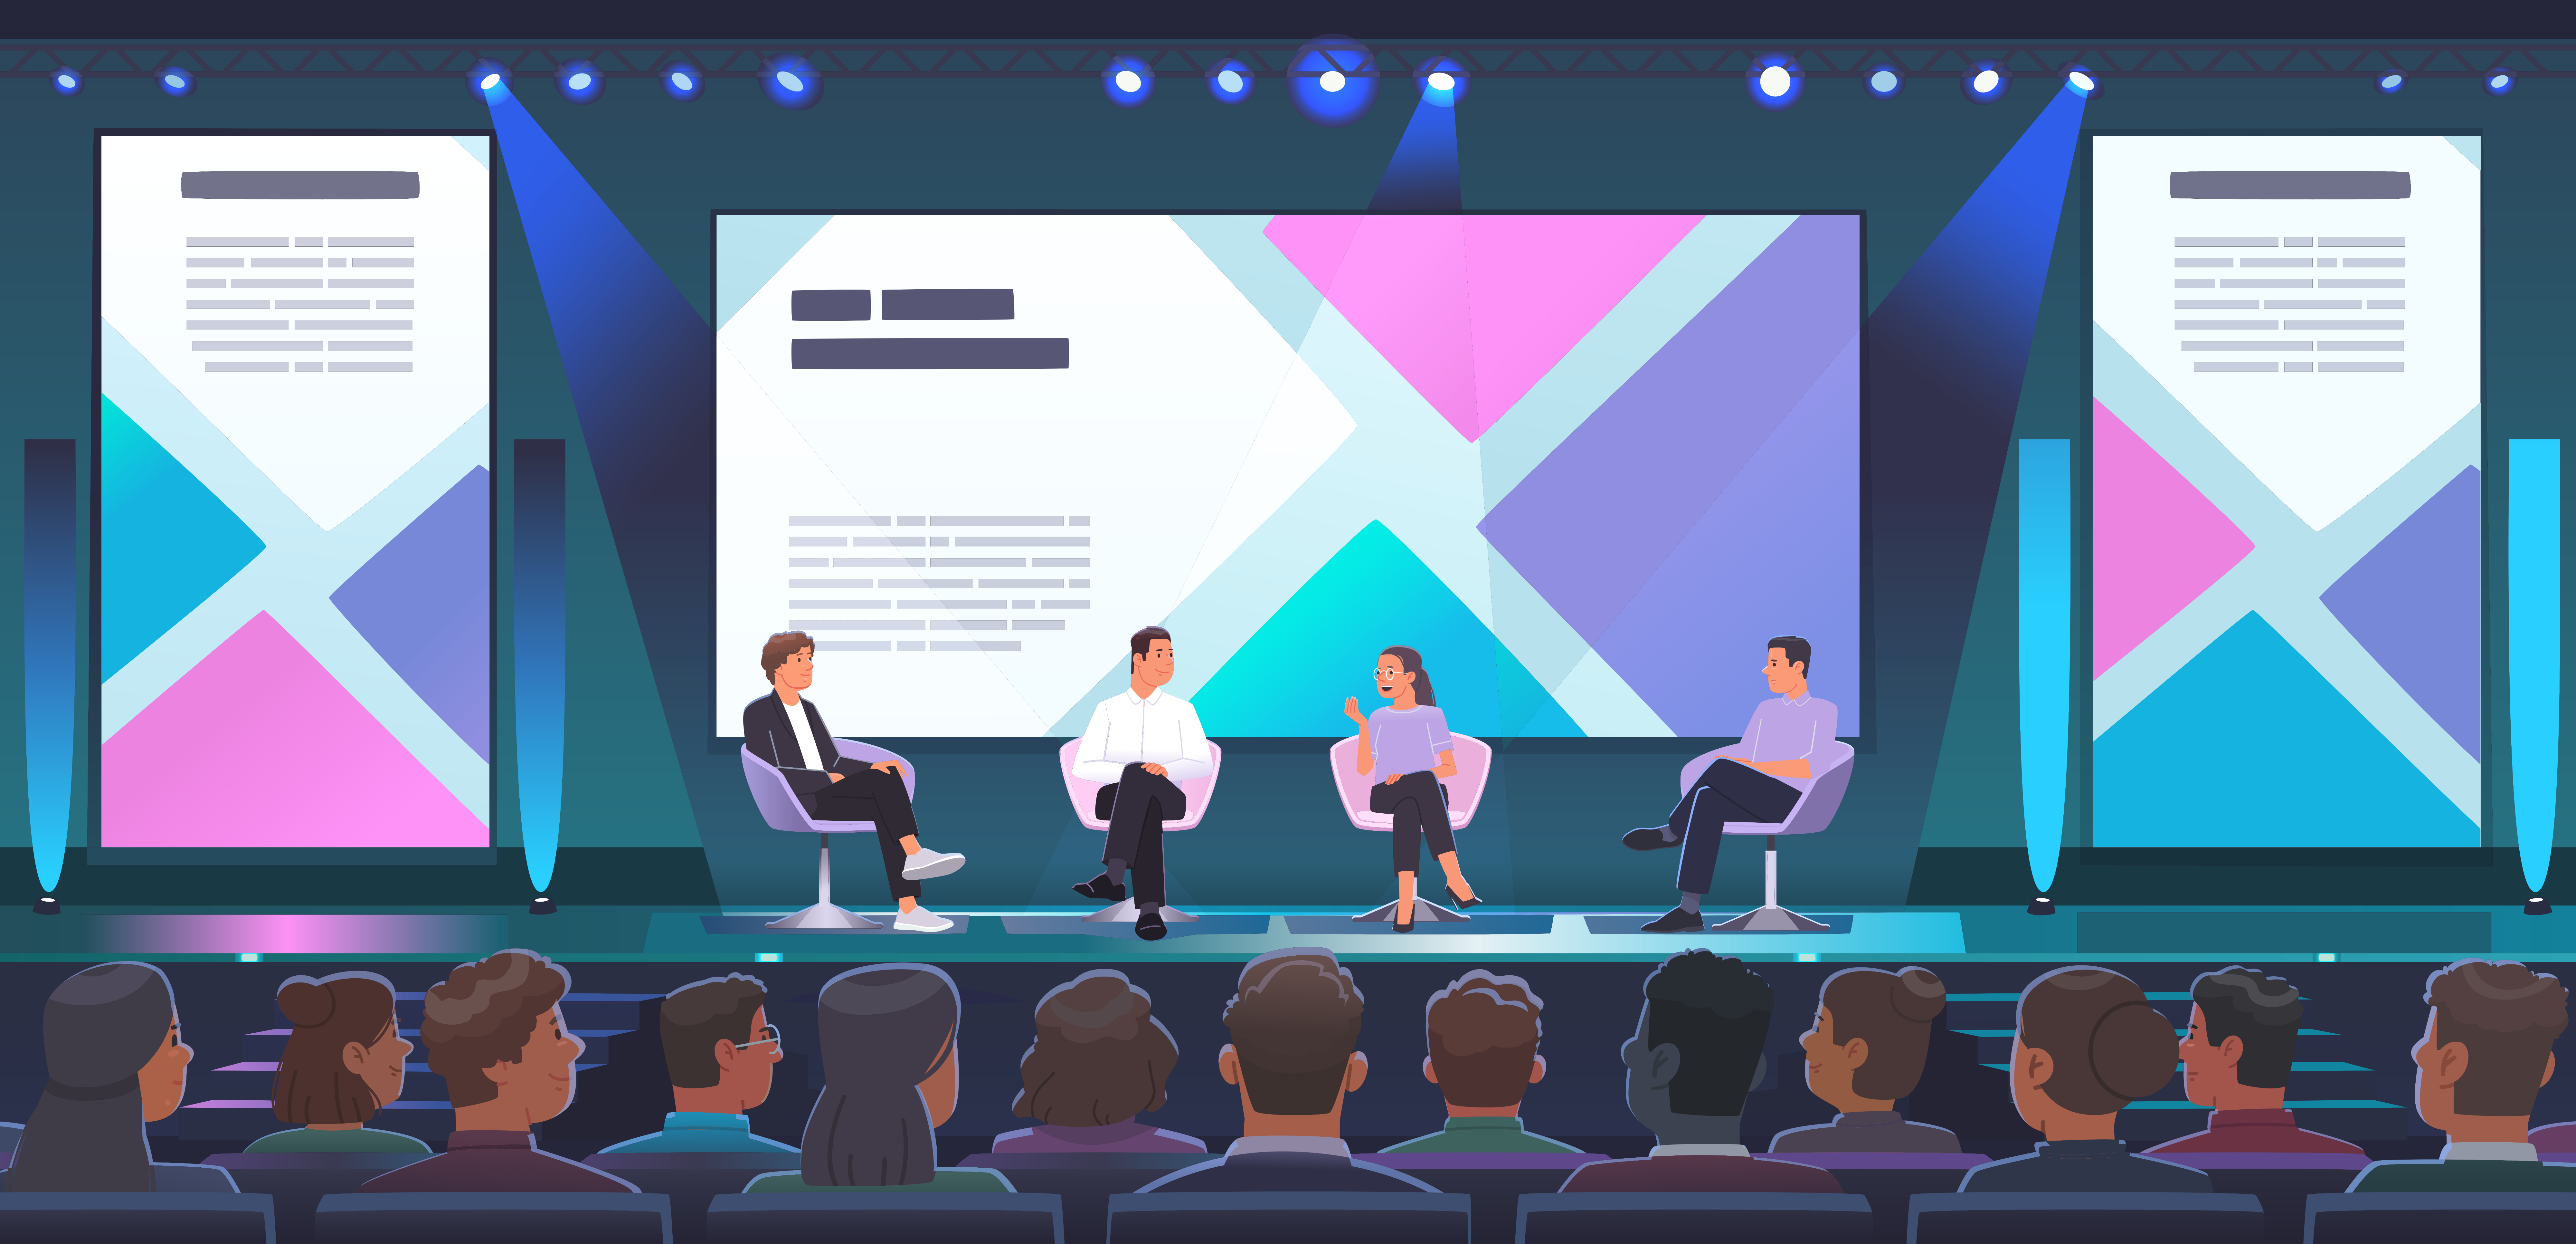 stylized graphic of four seated panelists in discussion at a conference with a large audience.